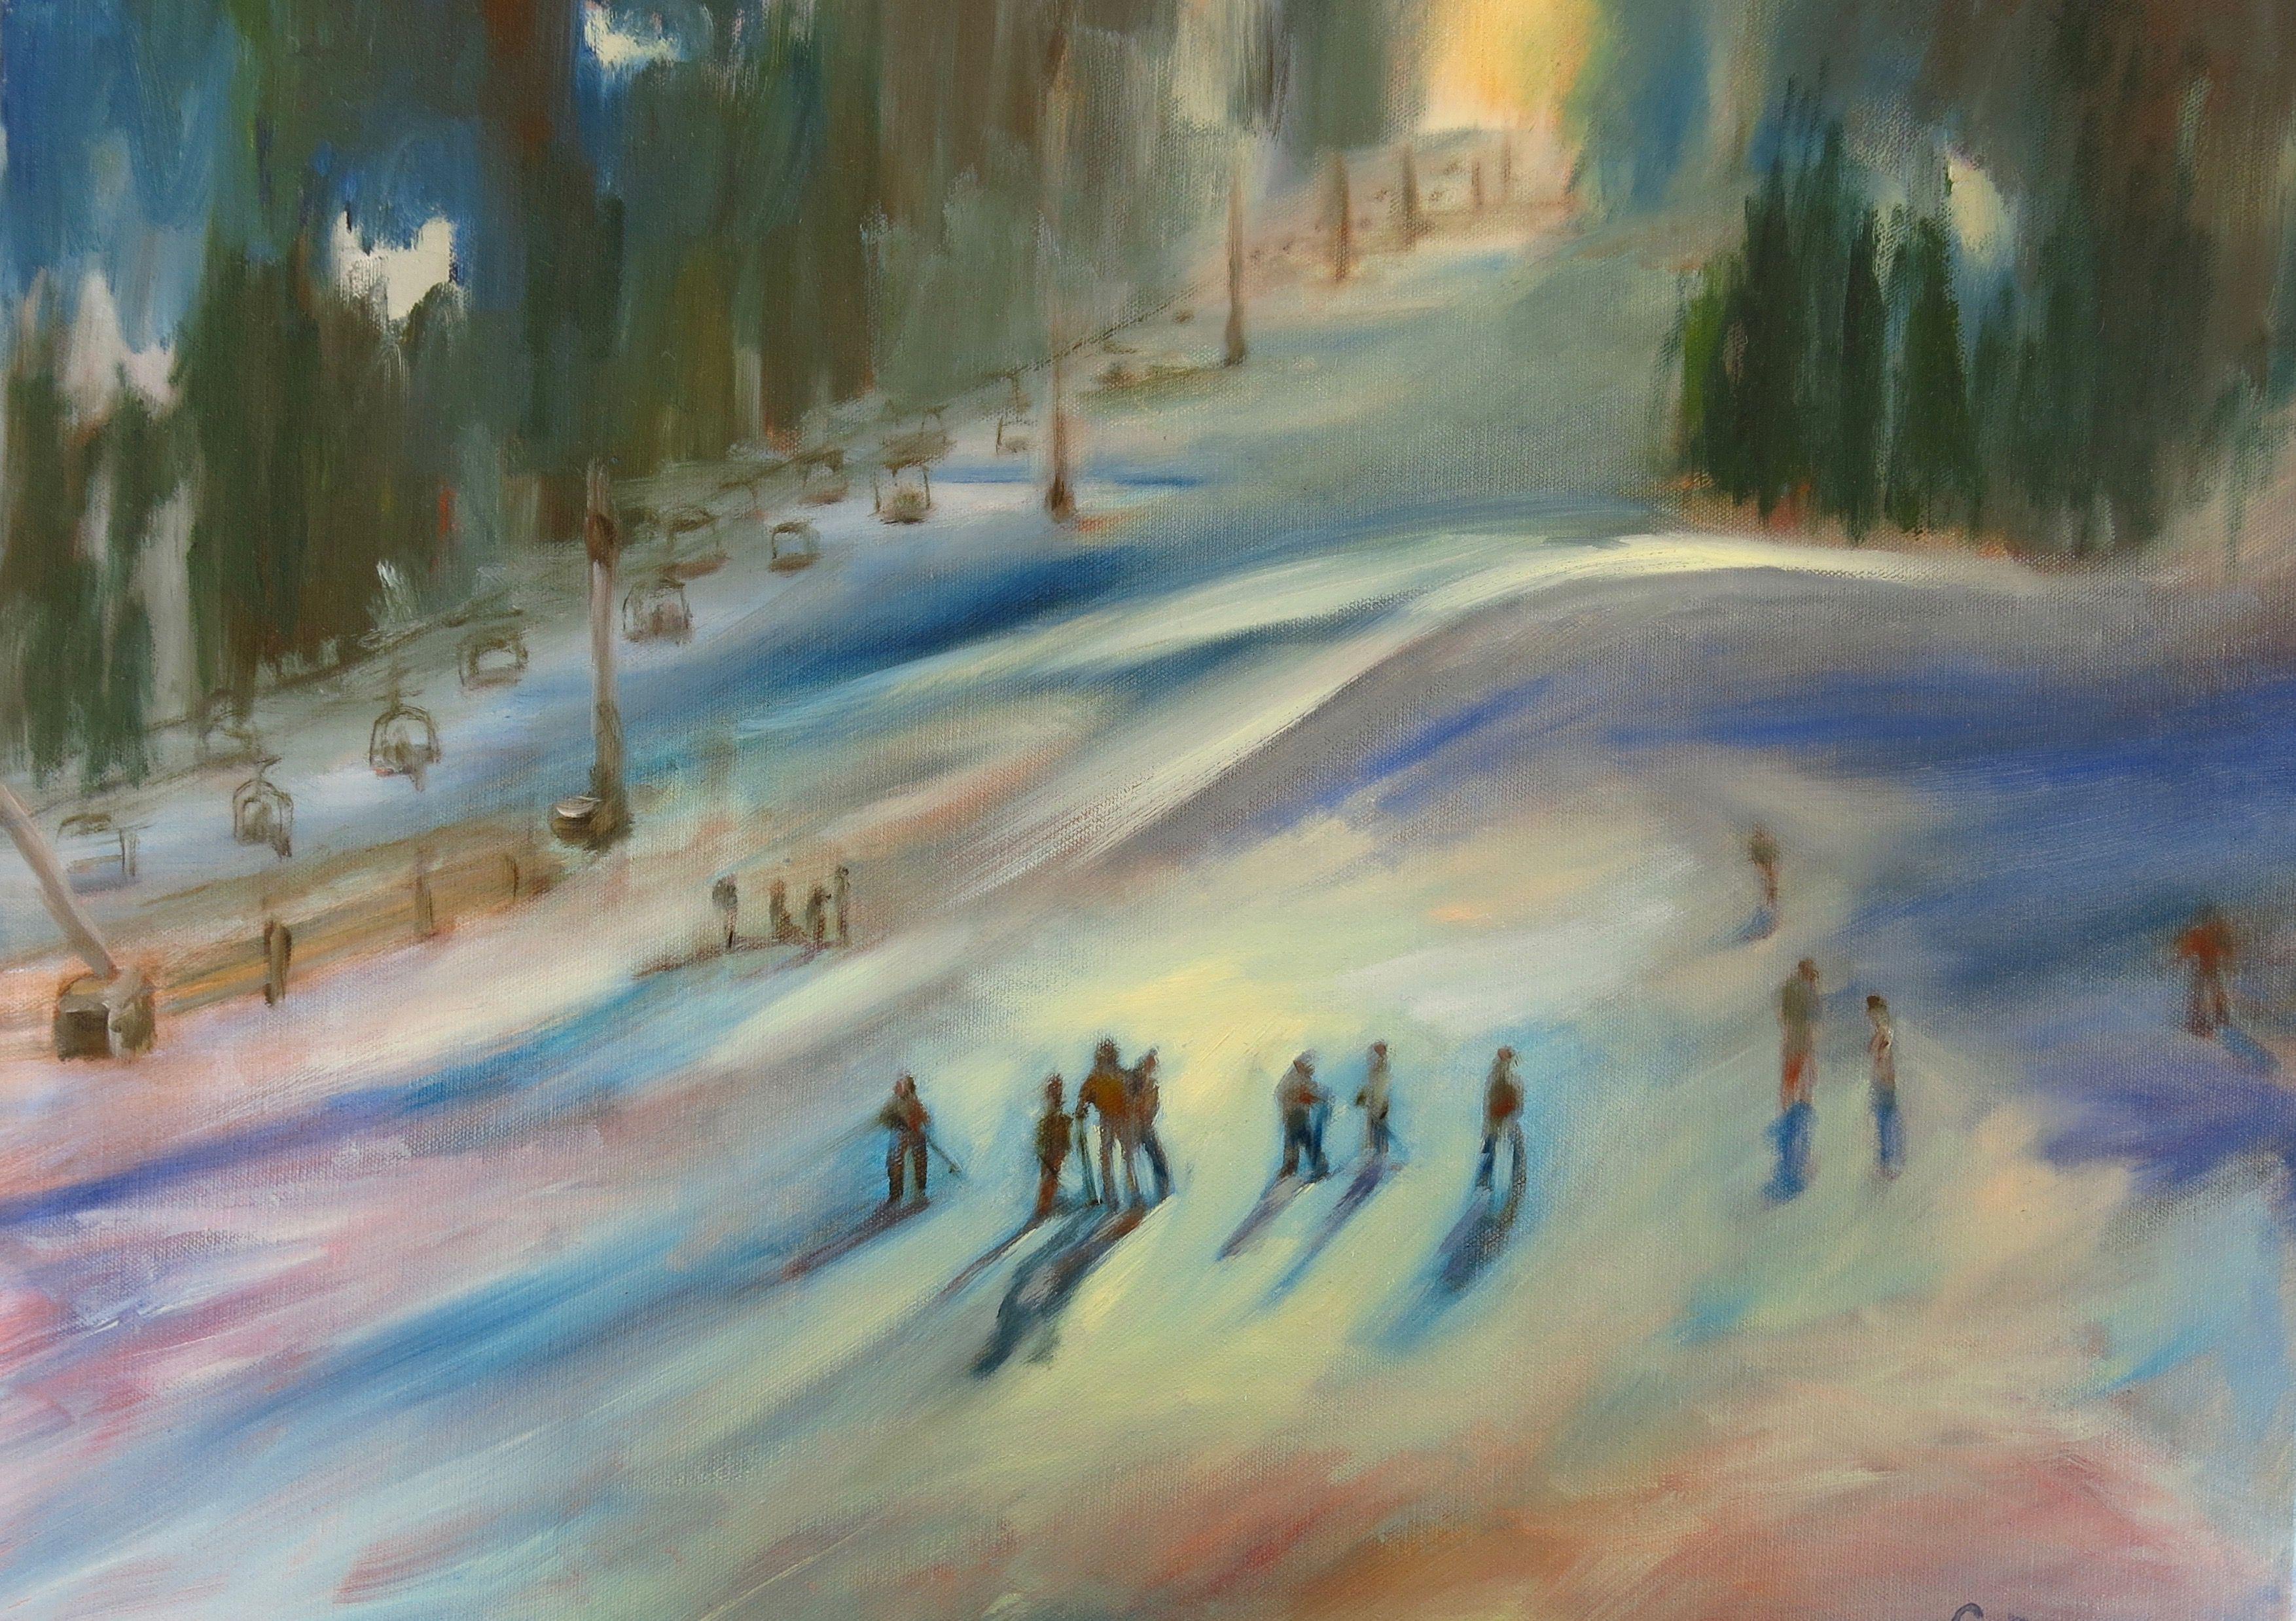 Off to the slopes sounds like a plan on this bright day.  Viewed from the chair lift is a group of newbies learning to ski. This colorful landscape painting was created in oil paints on a 18"x24" stretched canvas.  This unique piece will enhance